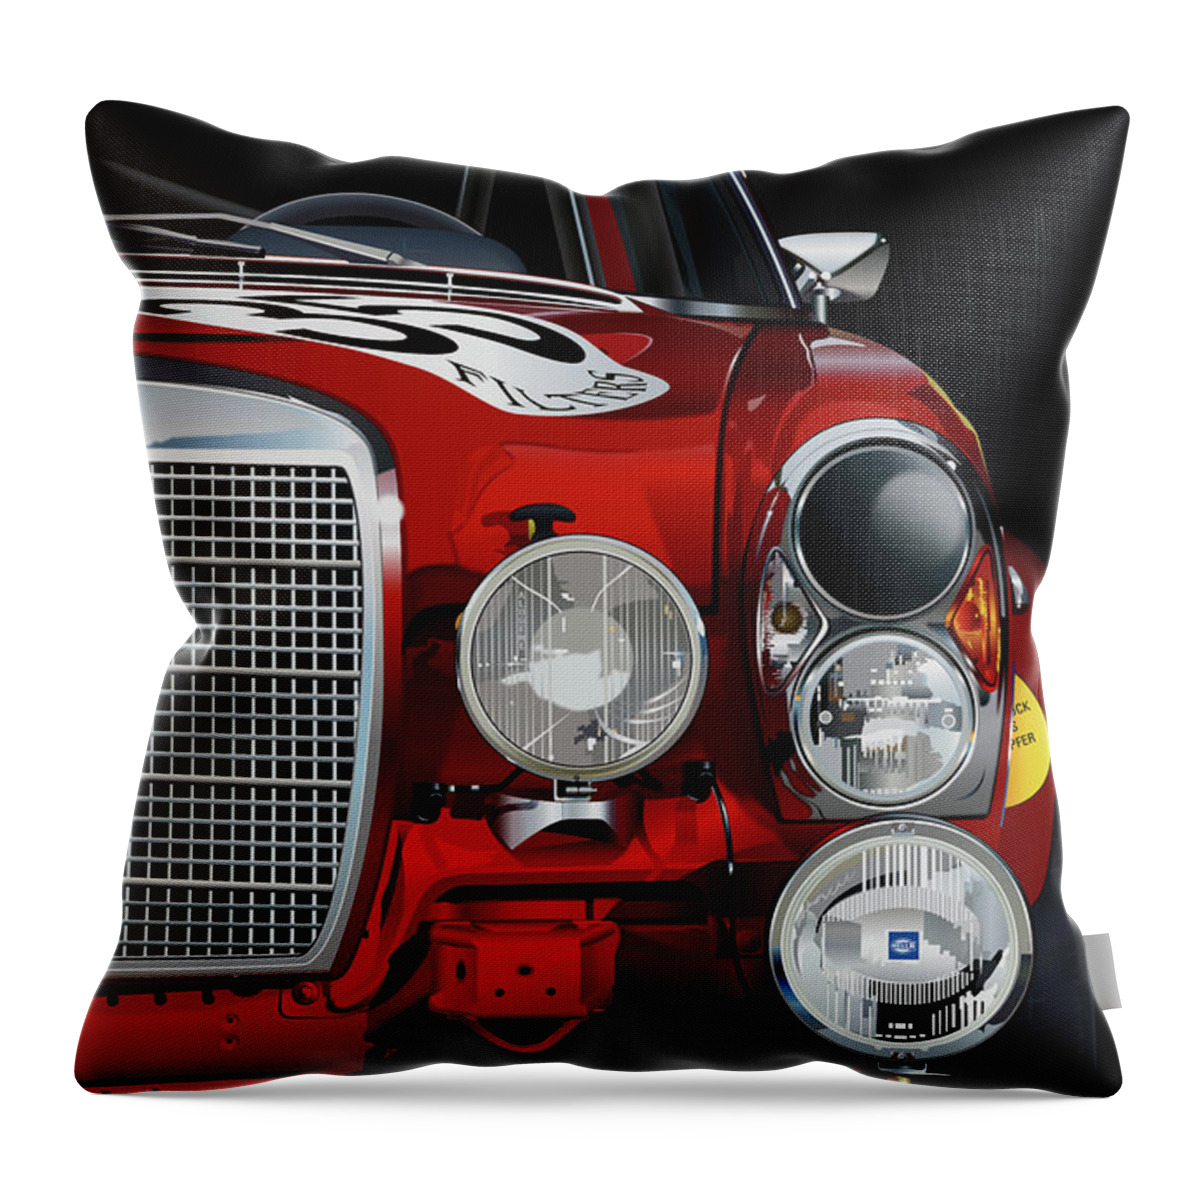 1971-mercedes-benz-300-sel-6.8-amg Throw Pillow featuring the drawing 1971-Mercedes-Benz-300-SEL-6.8-AMG by Alain Jamar